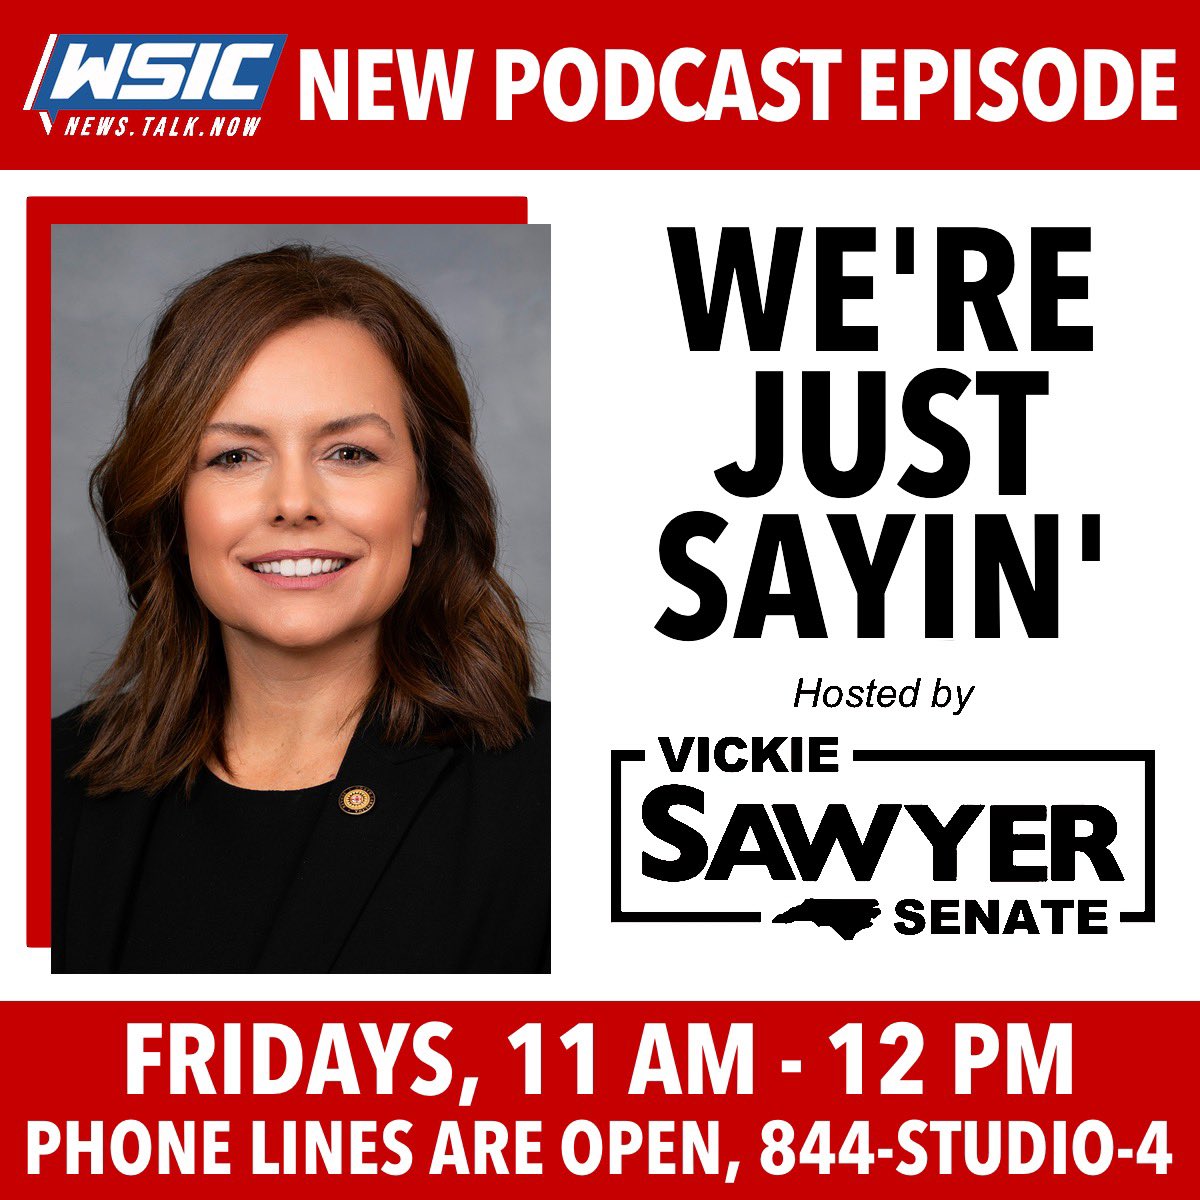 NEW EPISODE 🎙️ We’re back this week with a new episode of We’re Just Sayin’, where co-host David Coble and I talk about the latest presidential polling in NC, details on the push for a development moratorium in Mooresville & alternative solutions to address traffic congestion. We